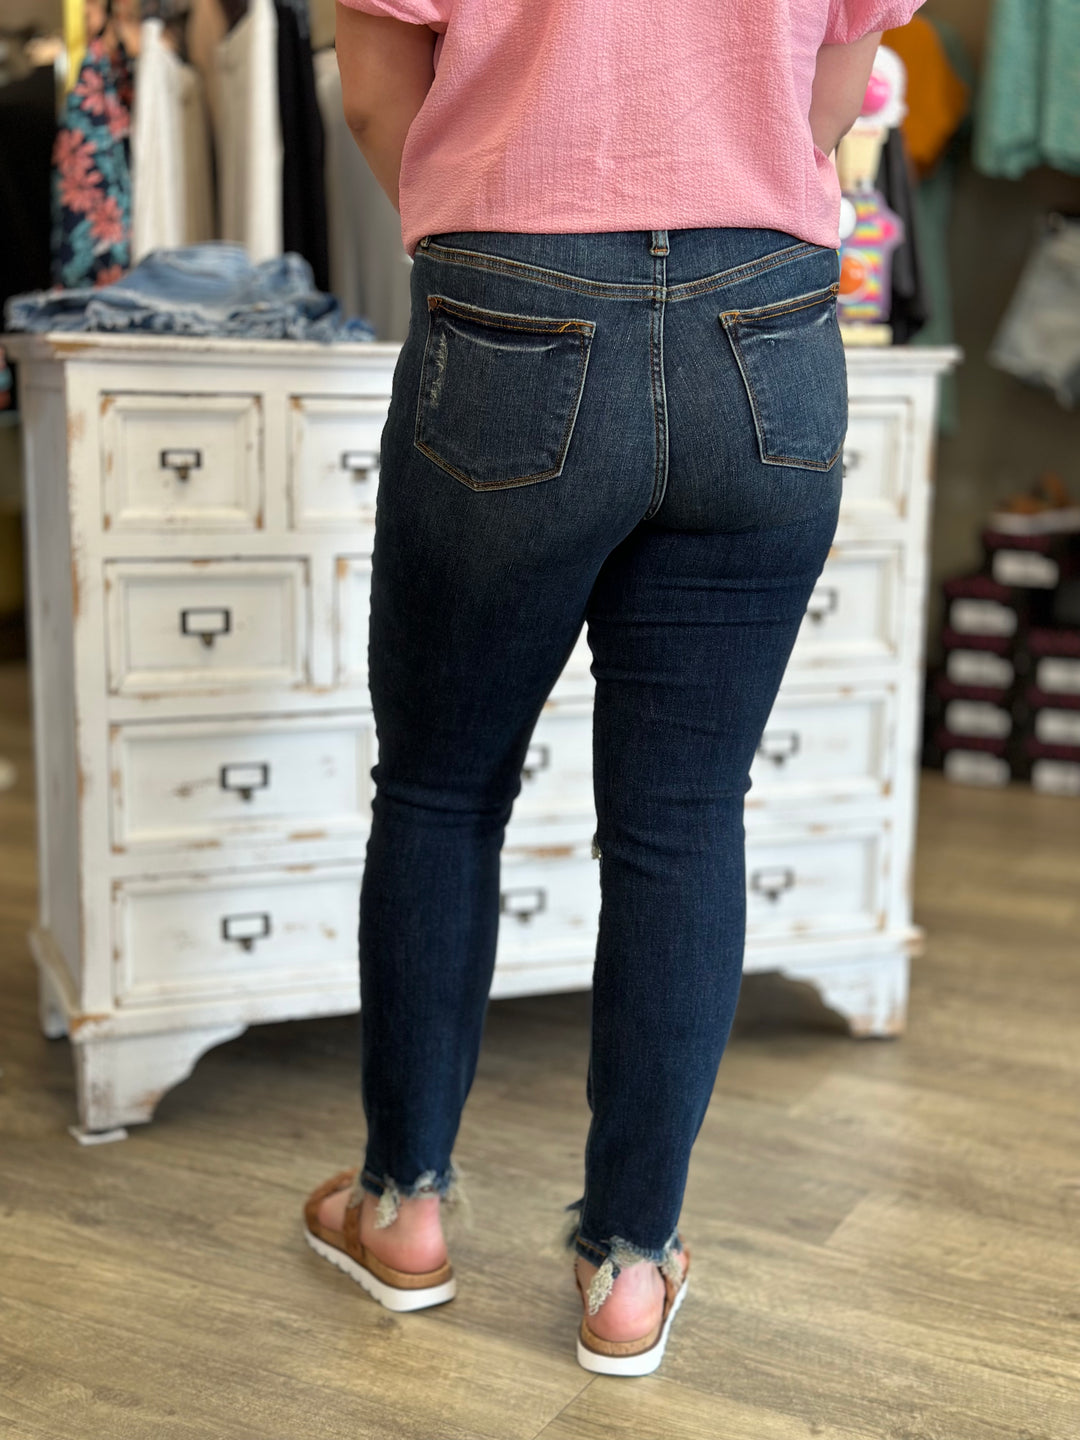 Judy Blue Take It Easy Mid Rise Relaxed Fit Jean | REGULAR-Jeans-Judy Blue-Evergreen Boutique, Women’s Fashion Boutique in Santa Claus, Indiana